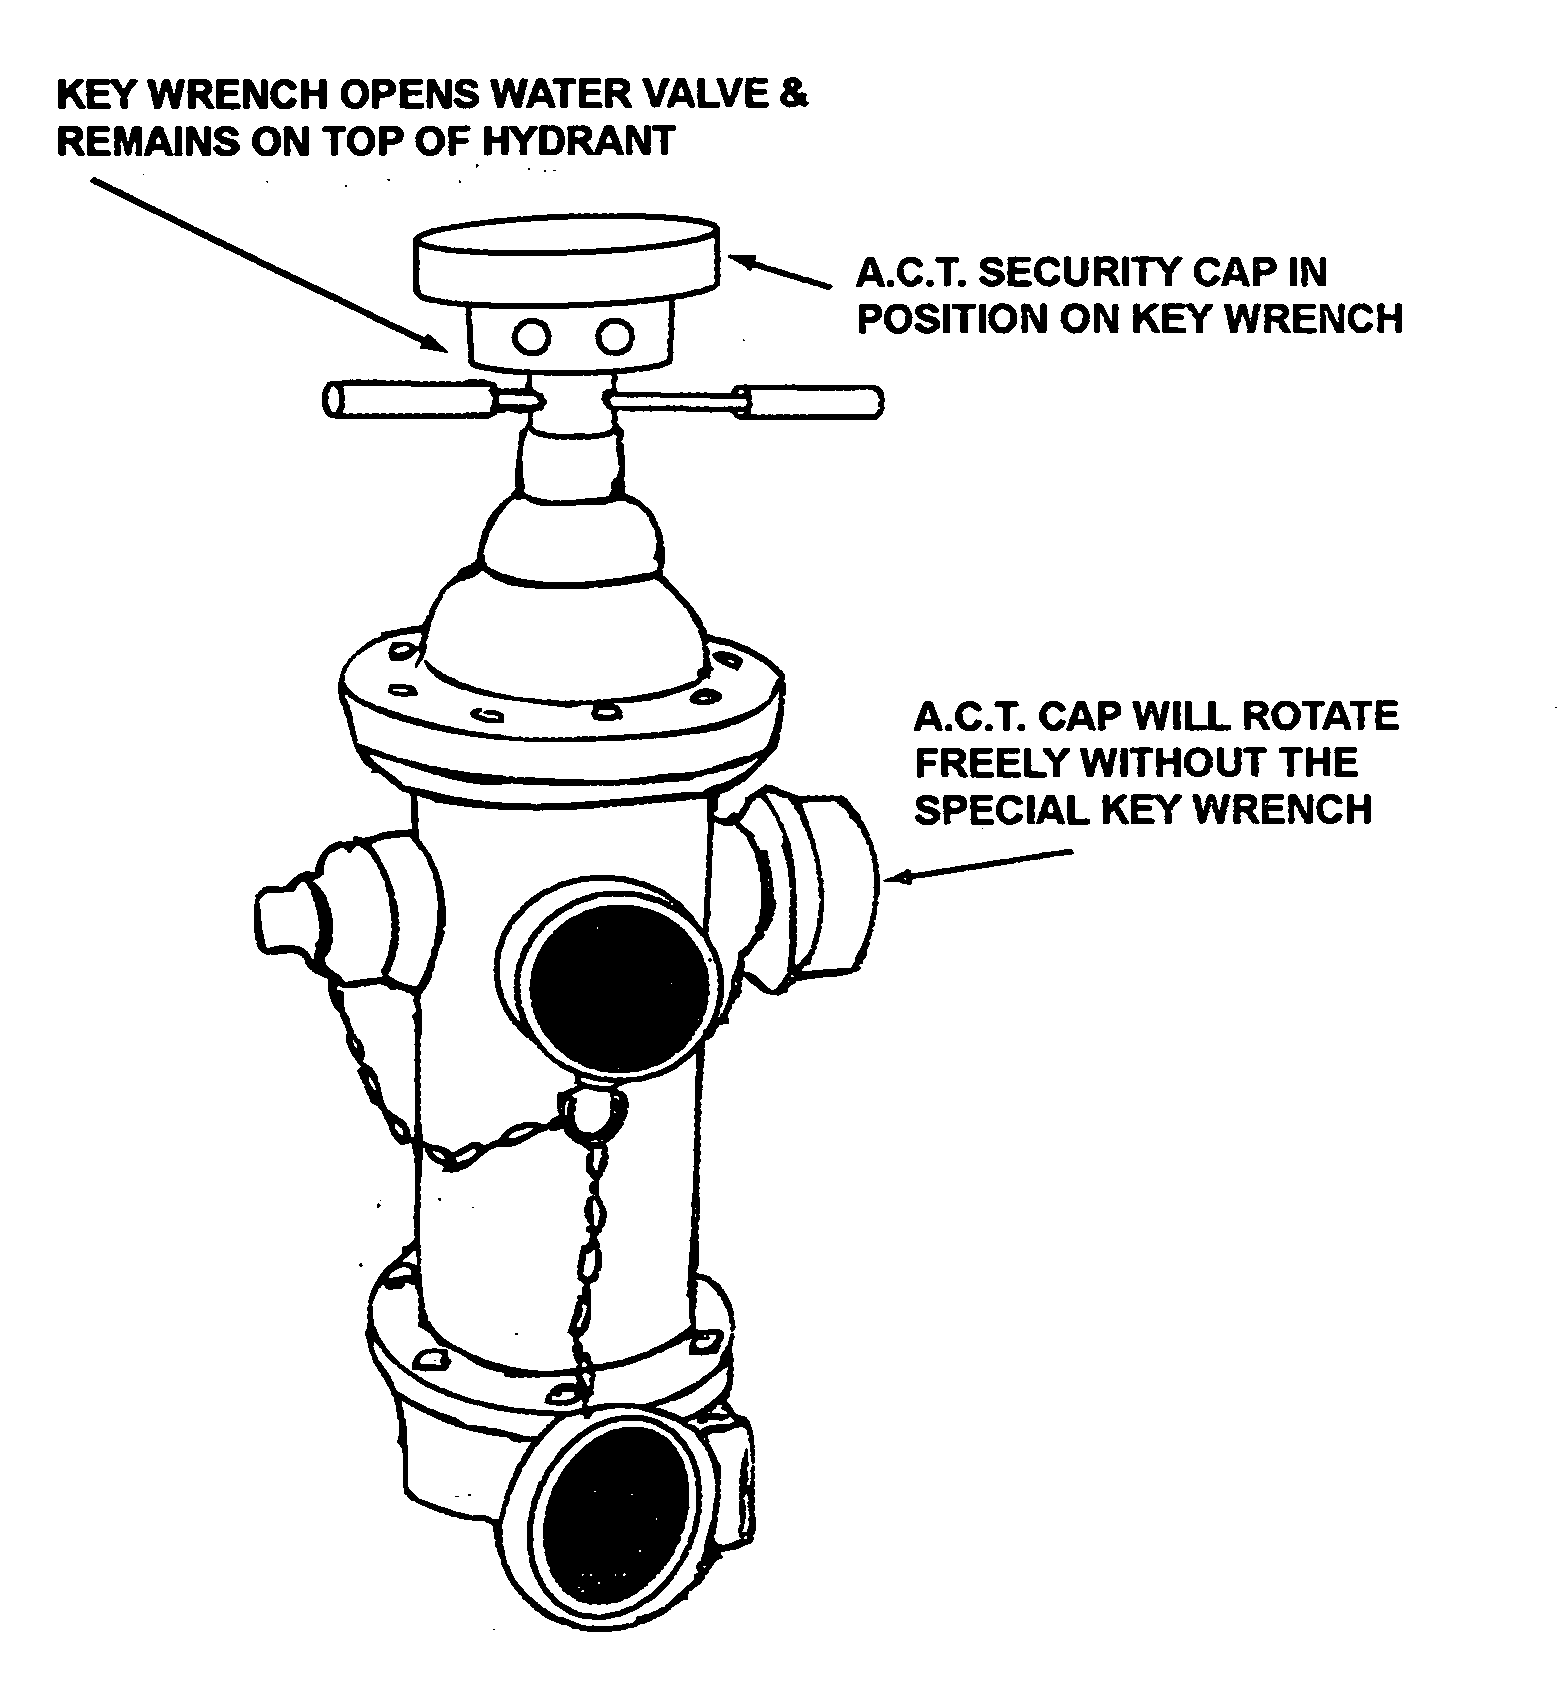 Fire hydrant security cap closure system